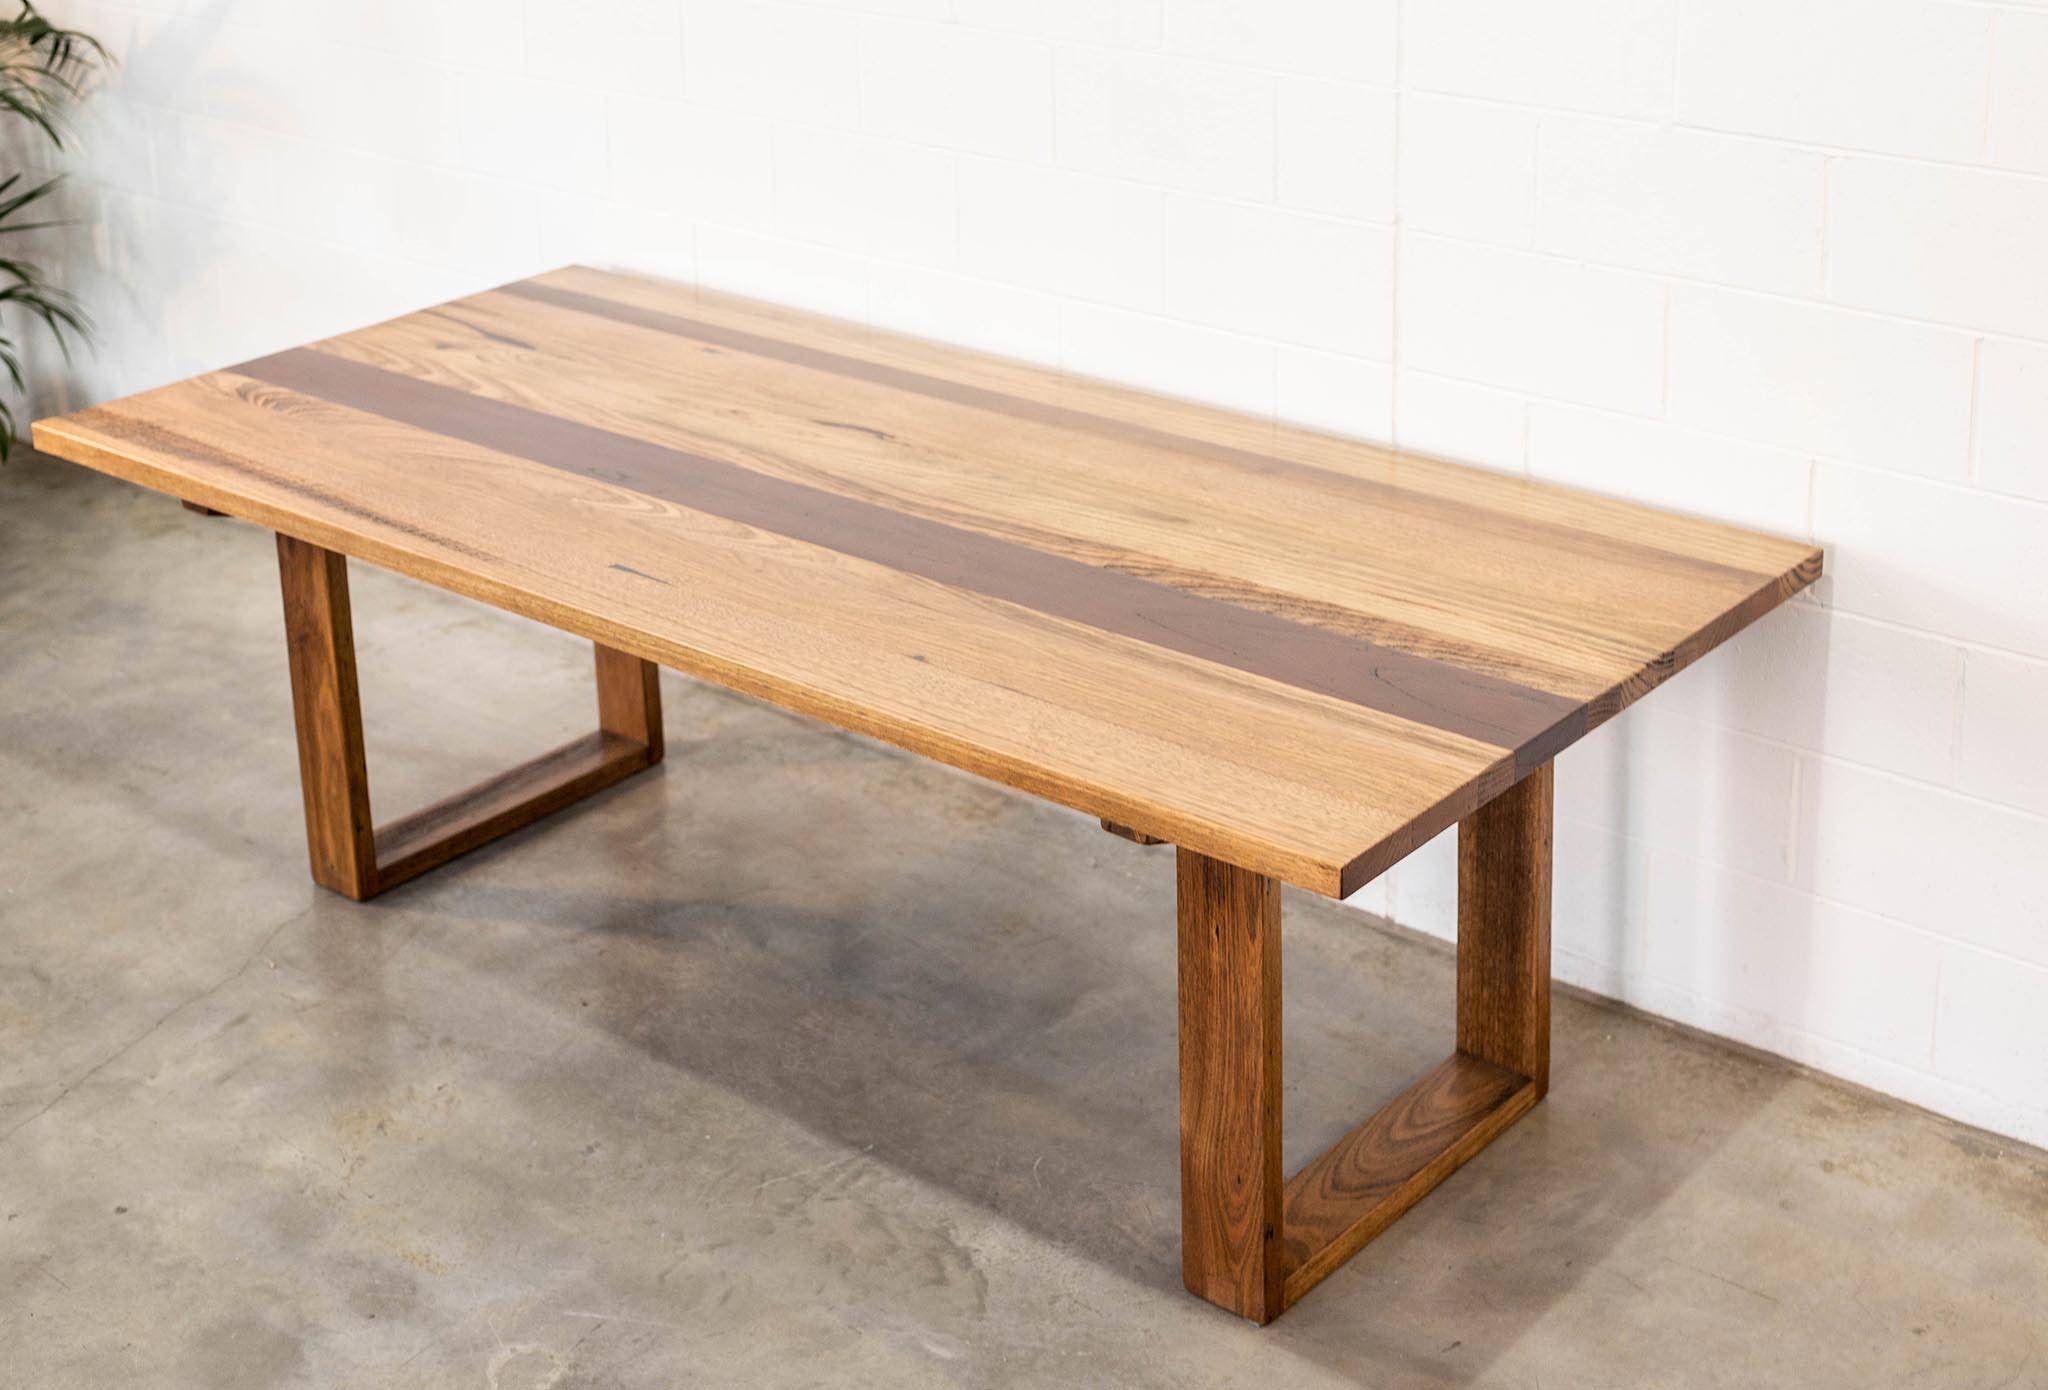 Straightboard Mixed Species Timber Box Ends Dining table